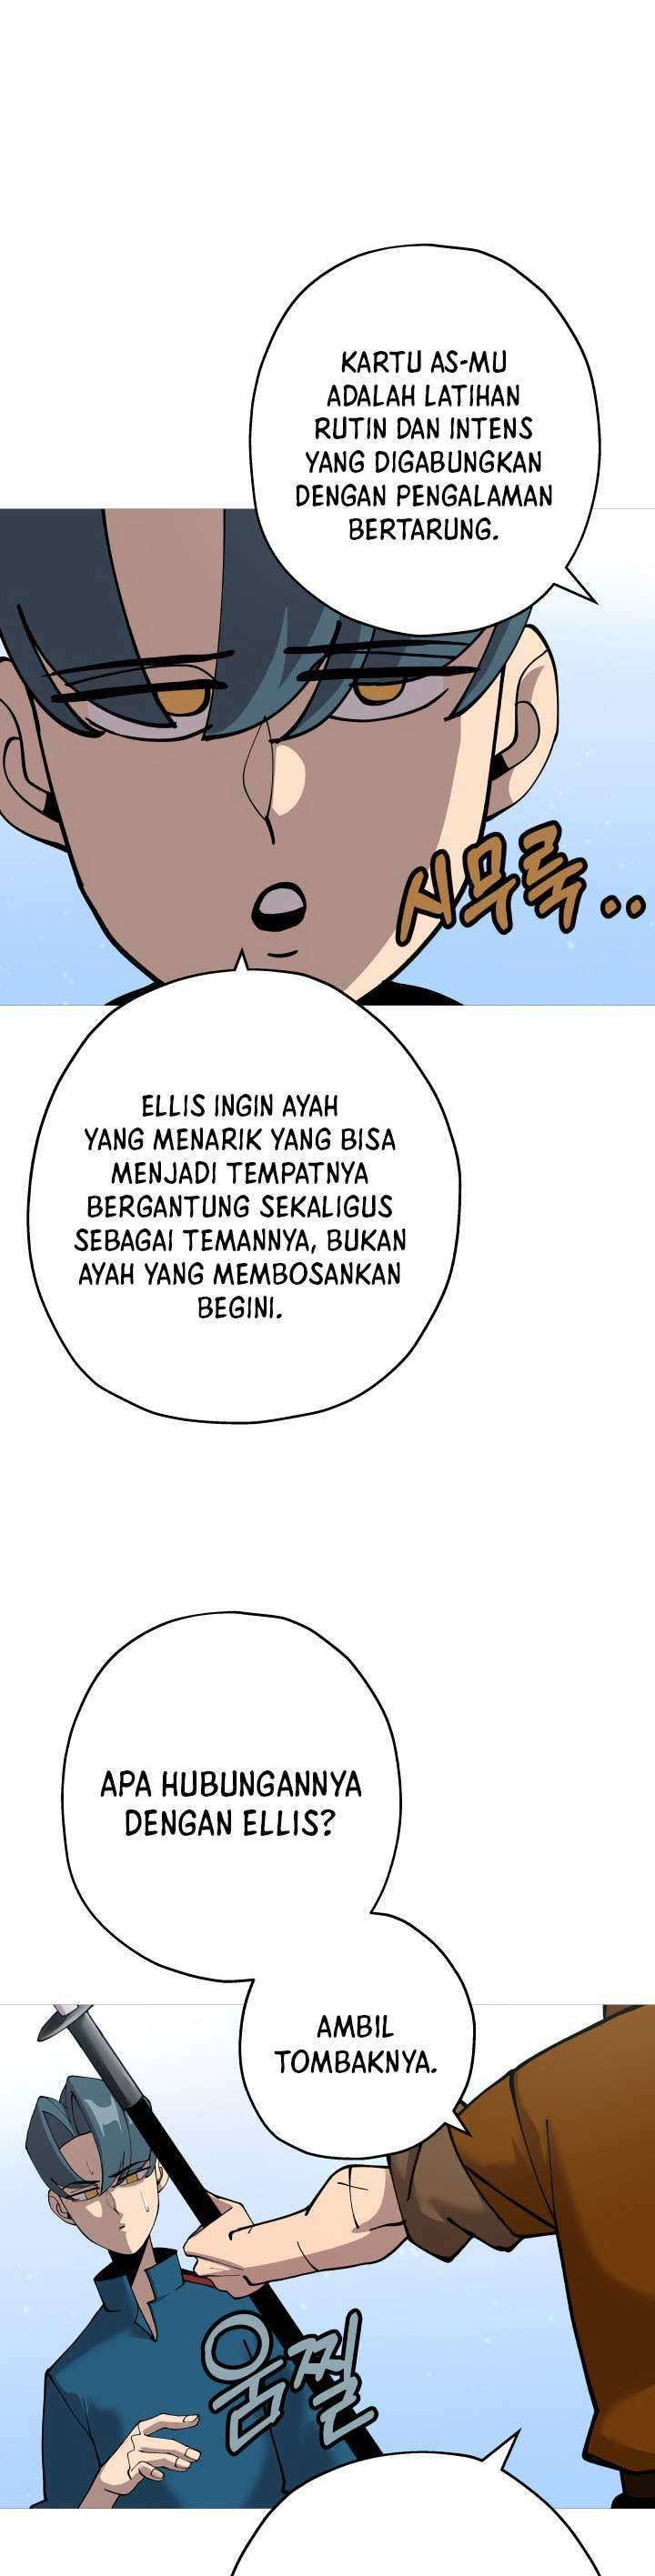 Dilarang COPAS - situs resmi www.mangacanblog.com - Komik the story of a low rank soldier becoming a monarch 029 - chapter 29 30 Indonesia the story of a low rank soldier becoming a monarch 029 - chapter 29 Terbaru 31|Baca Manga Komik Indonesia|Mangacan